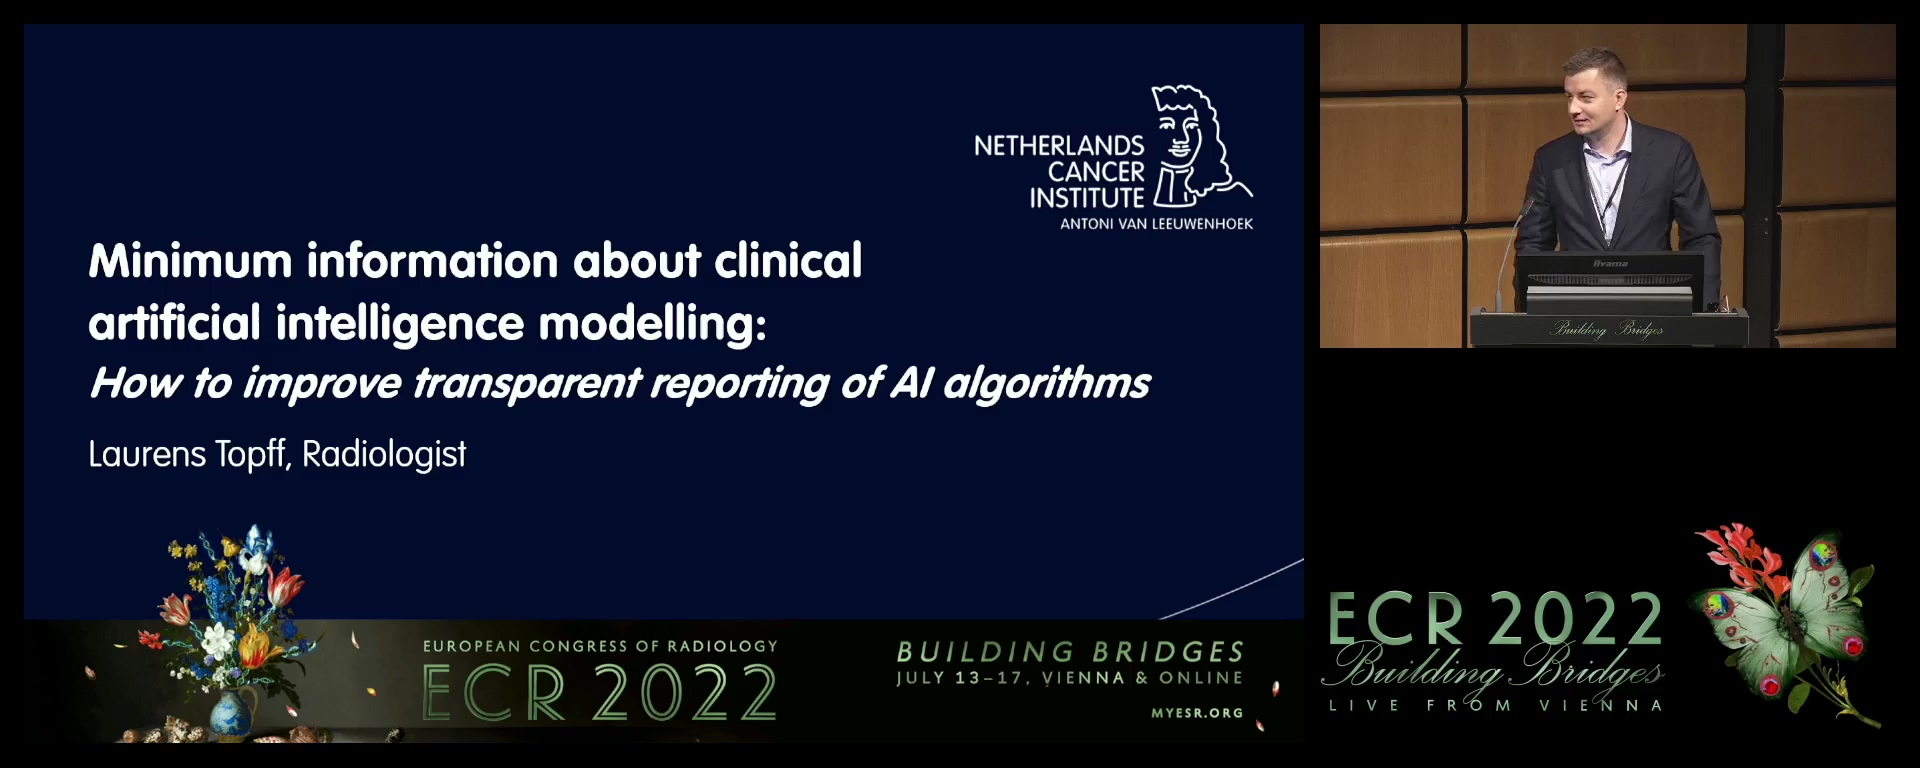 Minimum information about clinical artificial intelligence modelling: how to improve transparent reporting of AI algorithms - Laurens Topff, Amsterdam / NL